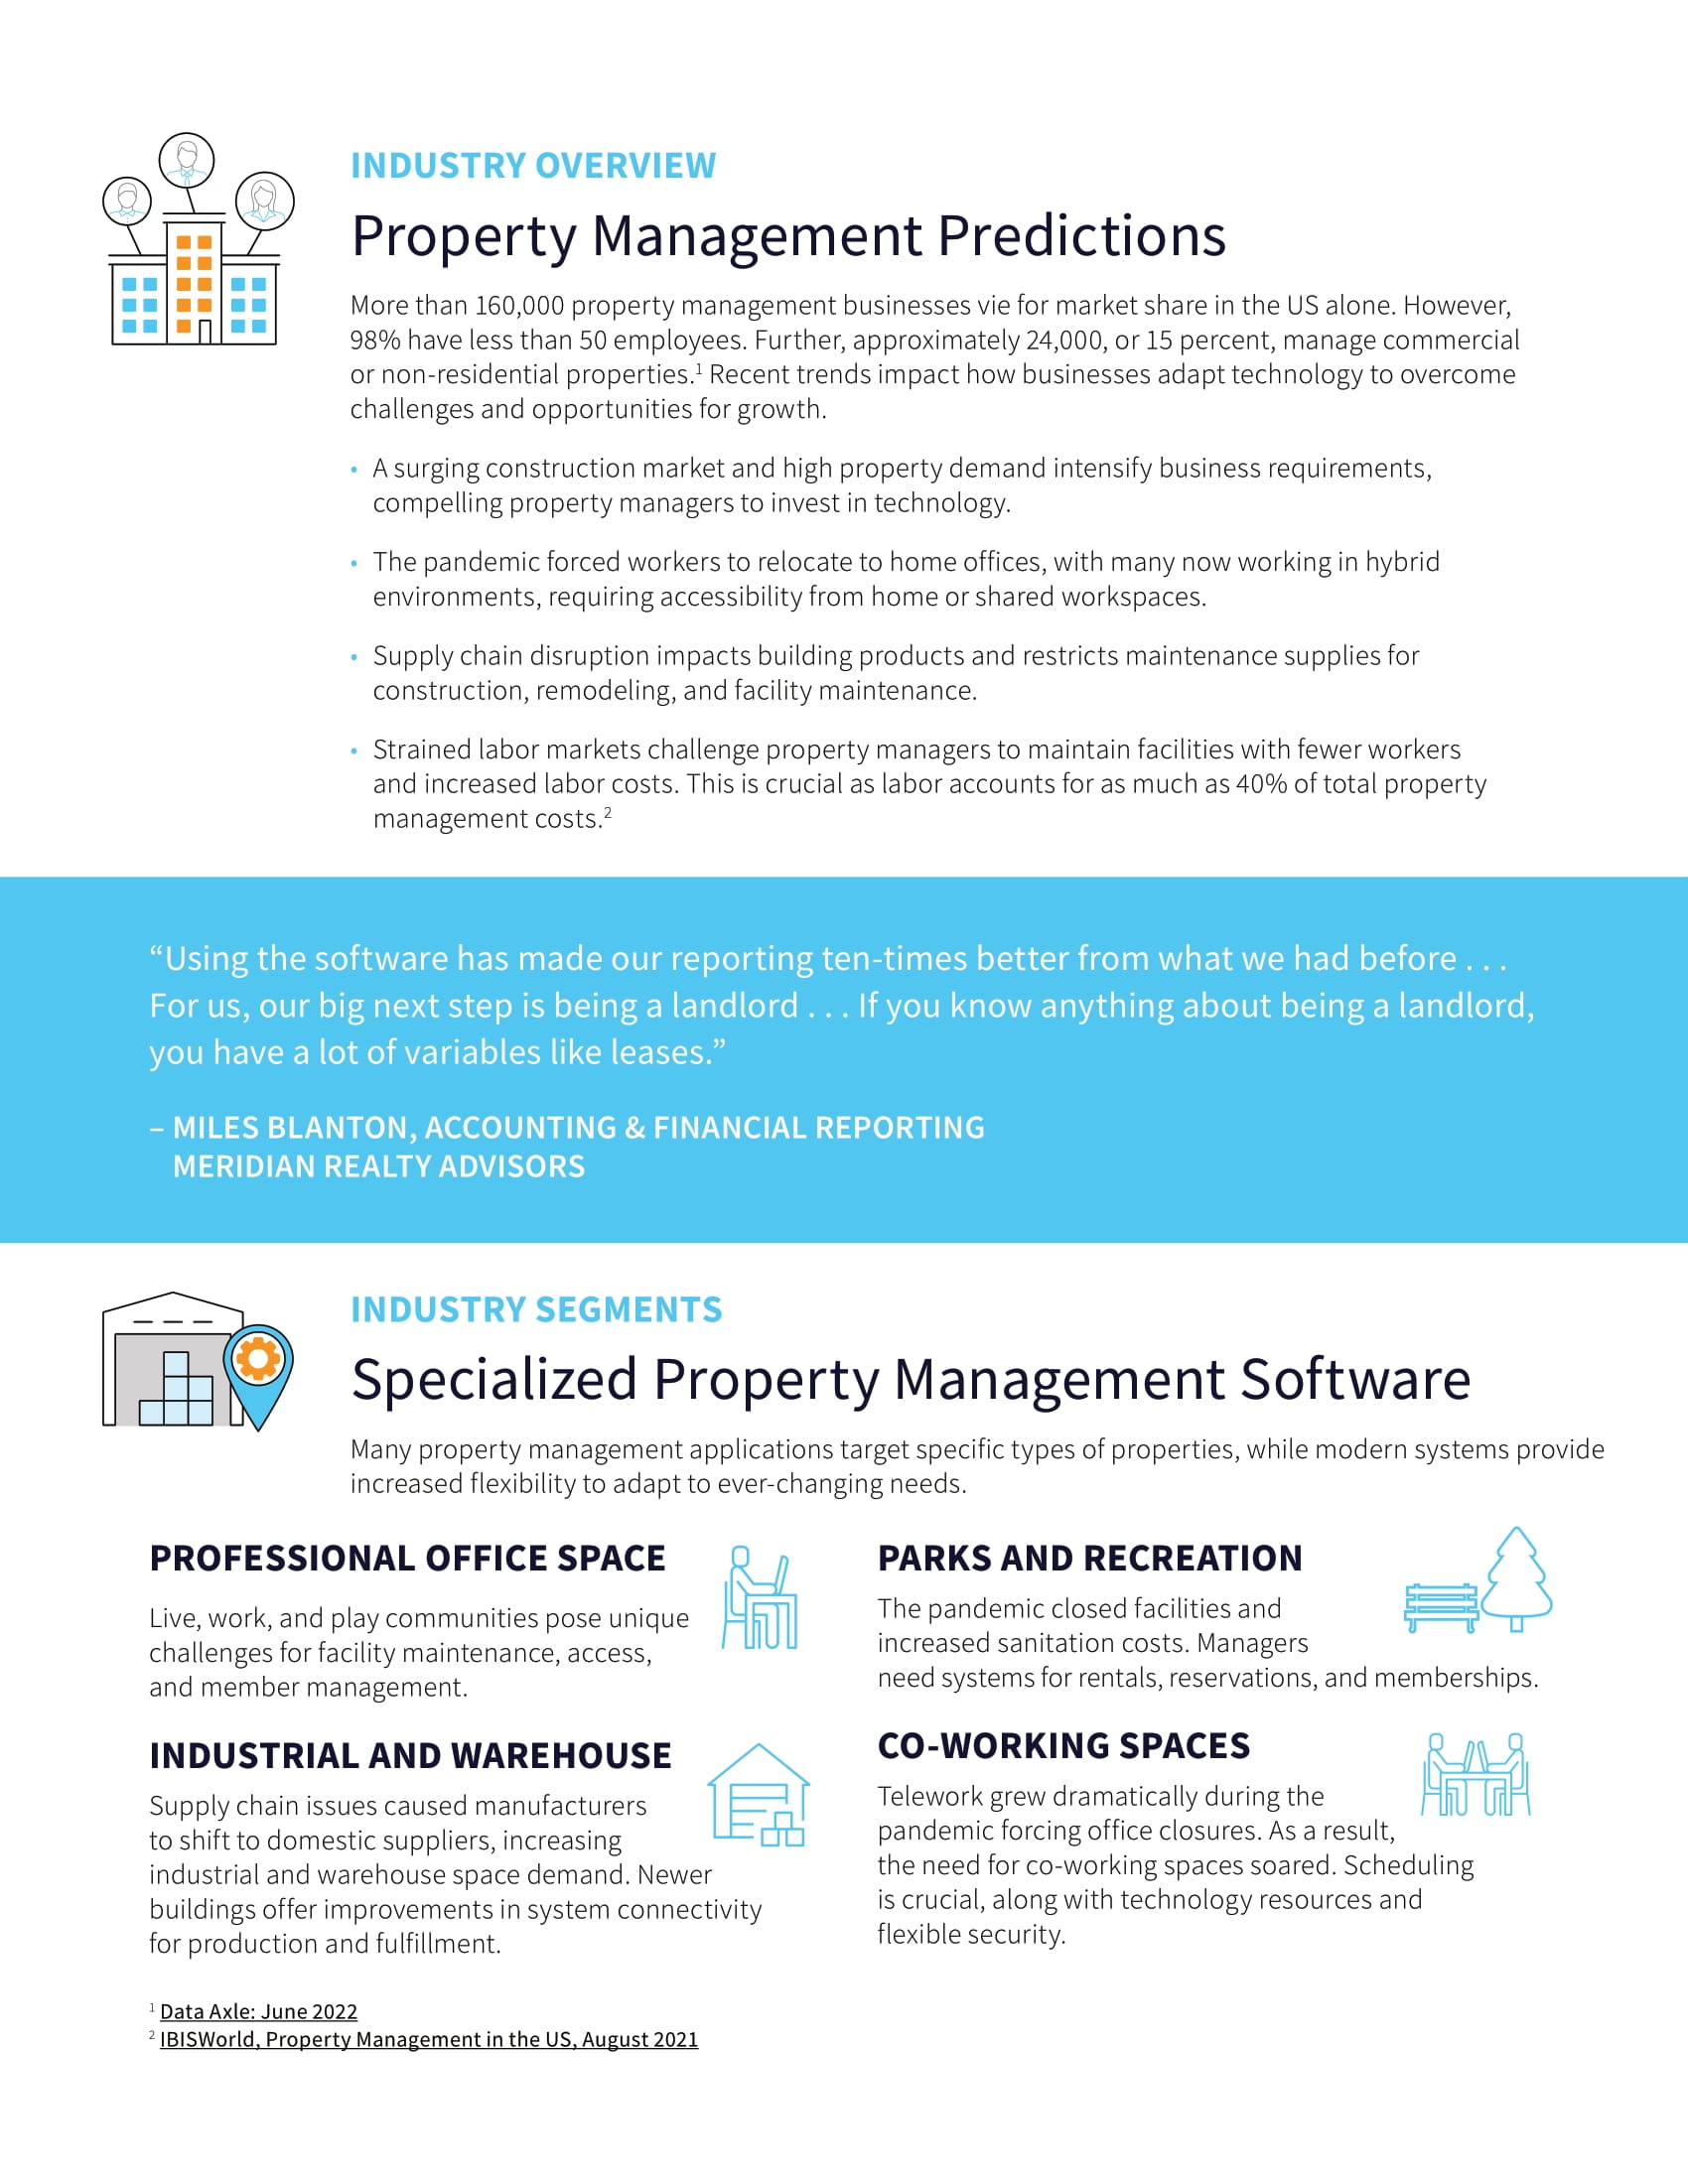 Serve Tenants Better with a Modern, Cloud-Based Property Management System  , page 1